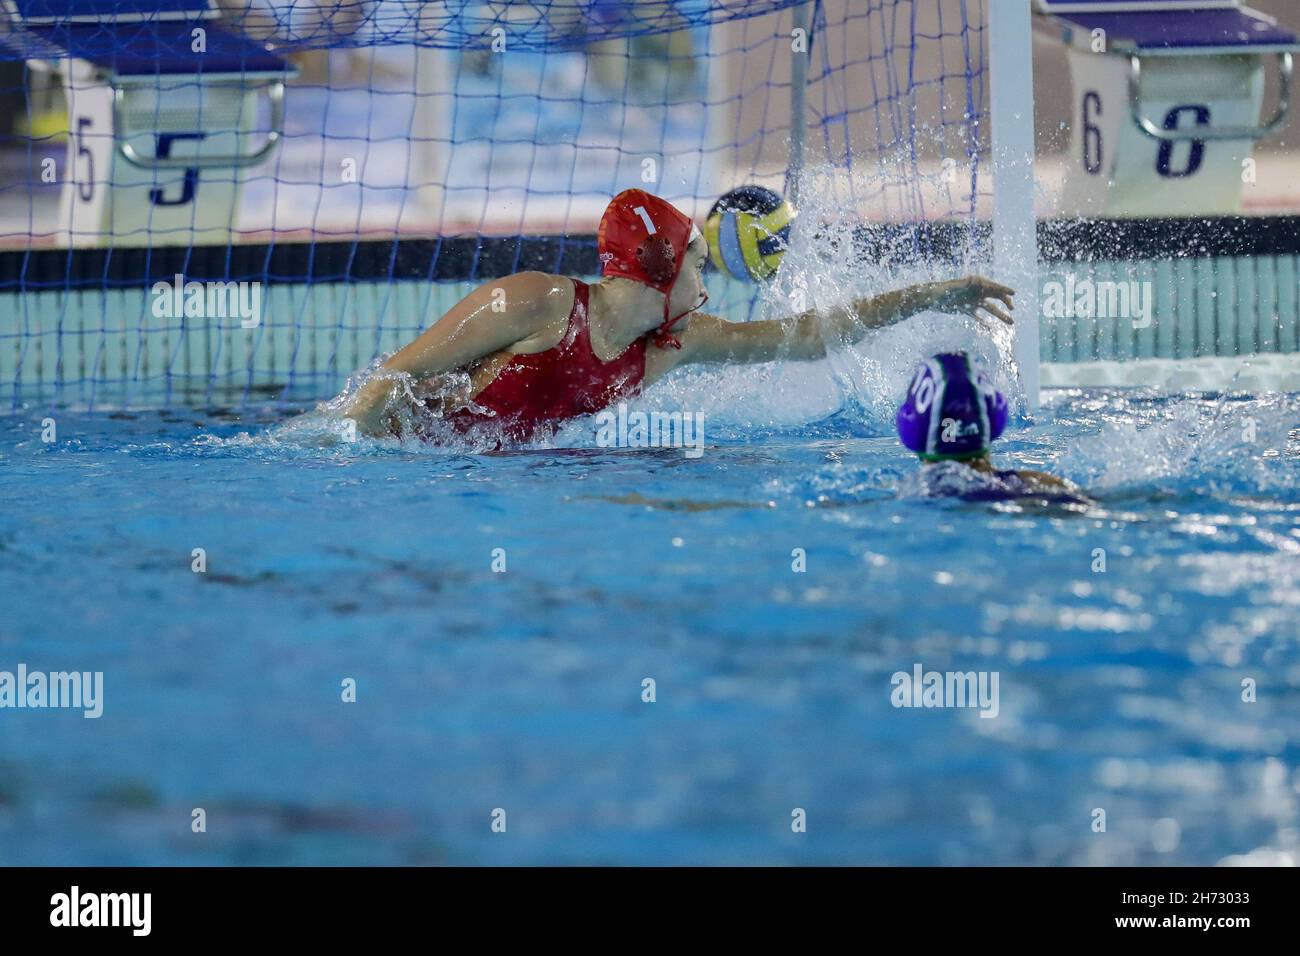 Rome, Italy. 19th Nov, 2021. goal Mediterrani Barcellona during SIS Roma vs CN Mediterrani Barcelona, Waterpolo EuroLeague Women match in Rome, Italy, November 19 2021 Credit: Independent Photo Agency/Alamy Live News Stock Photo